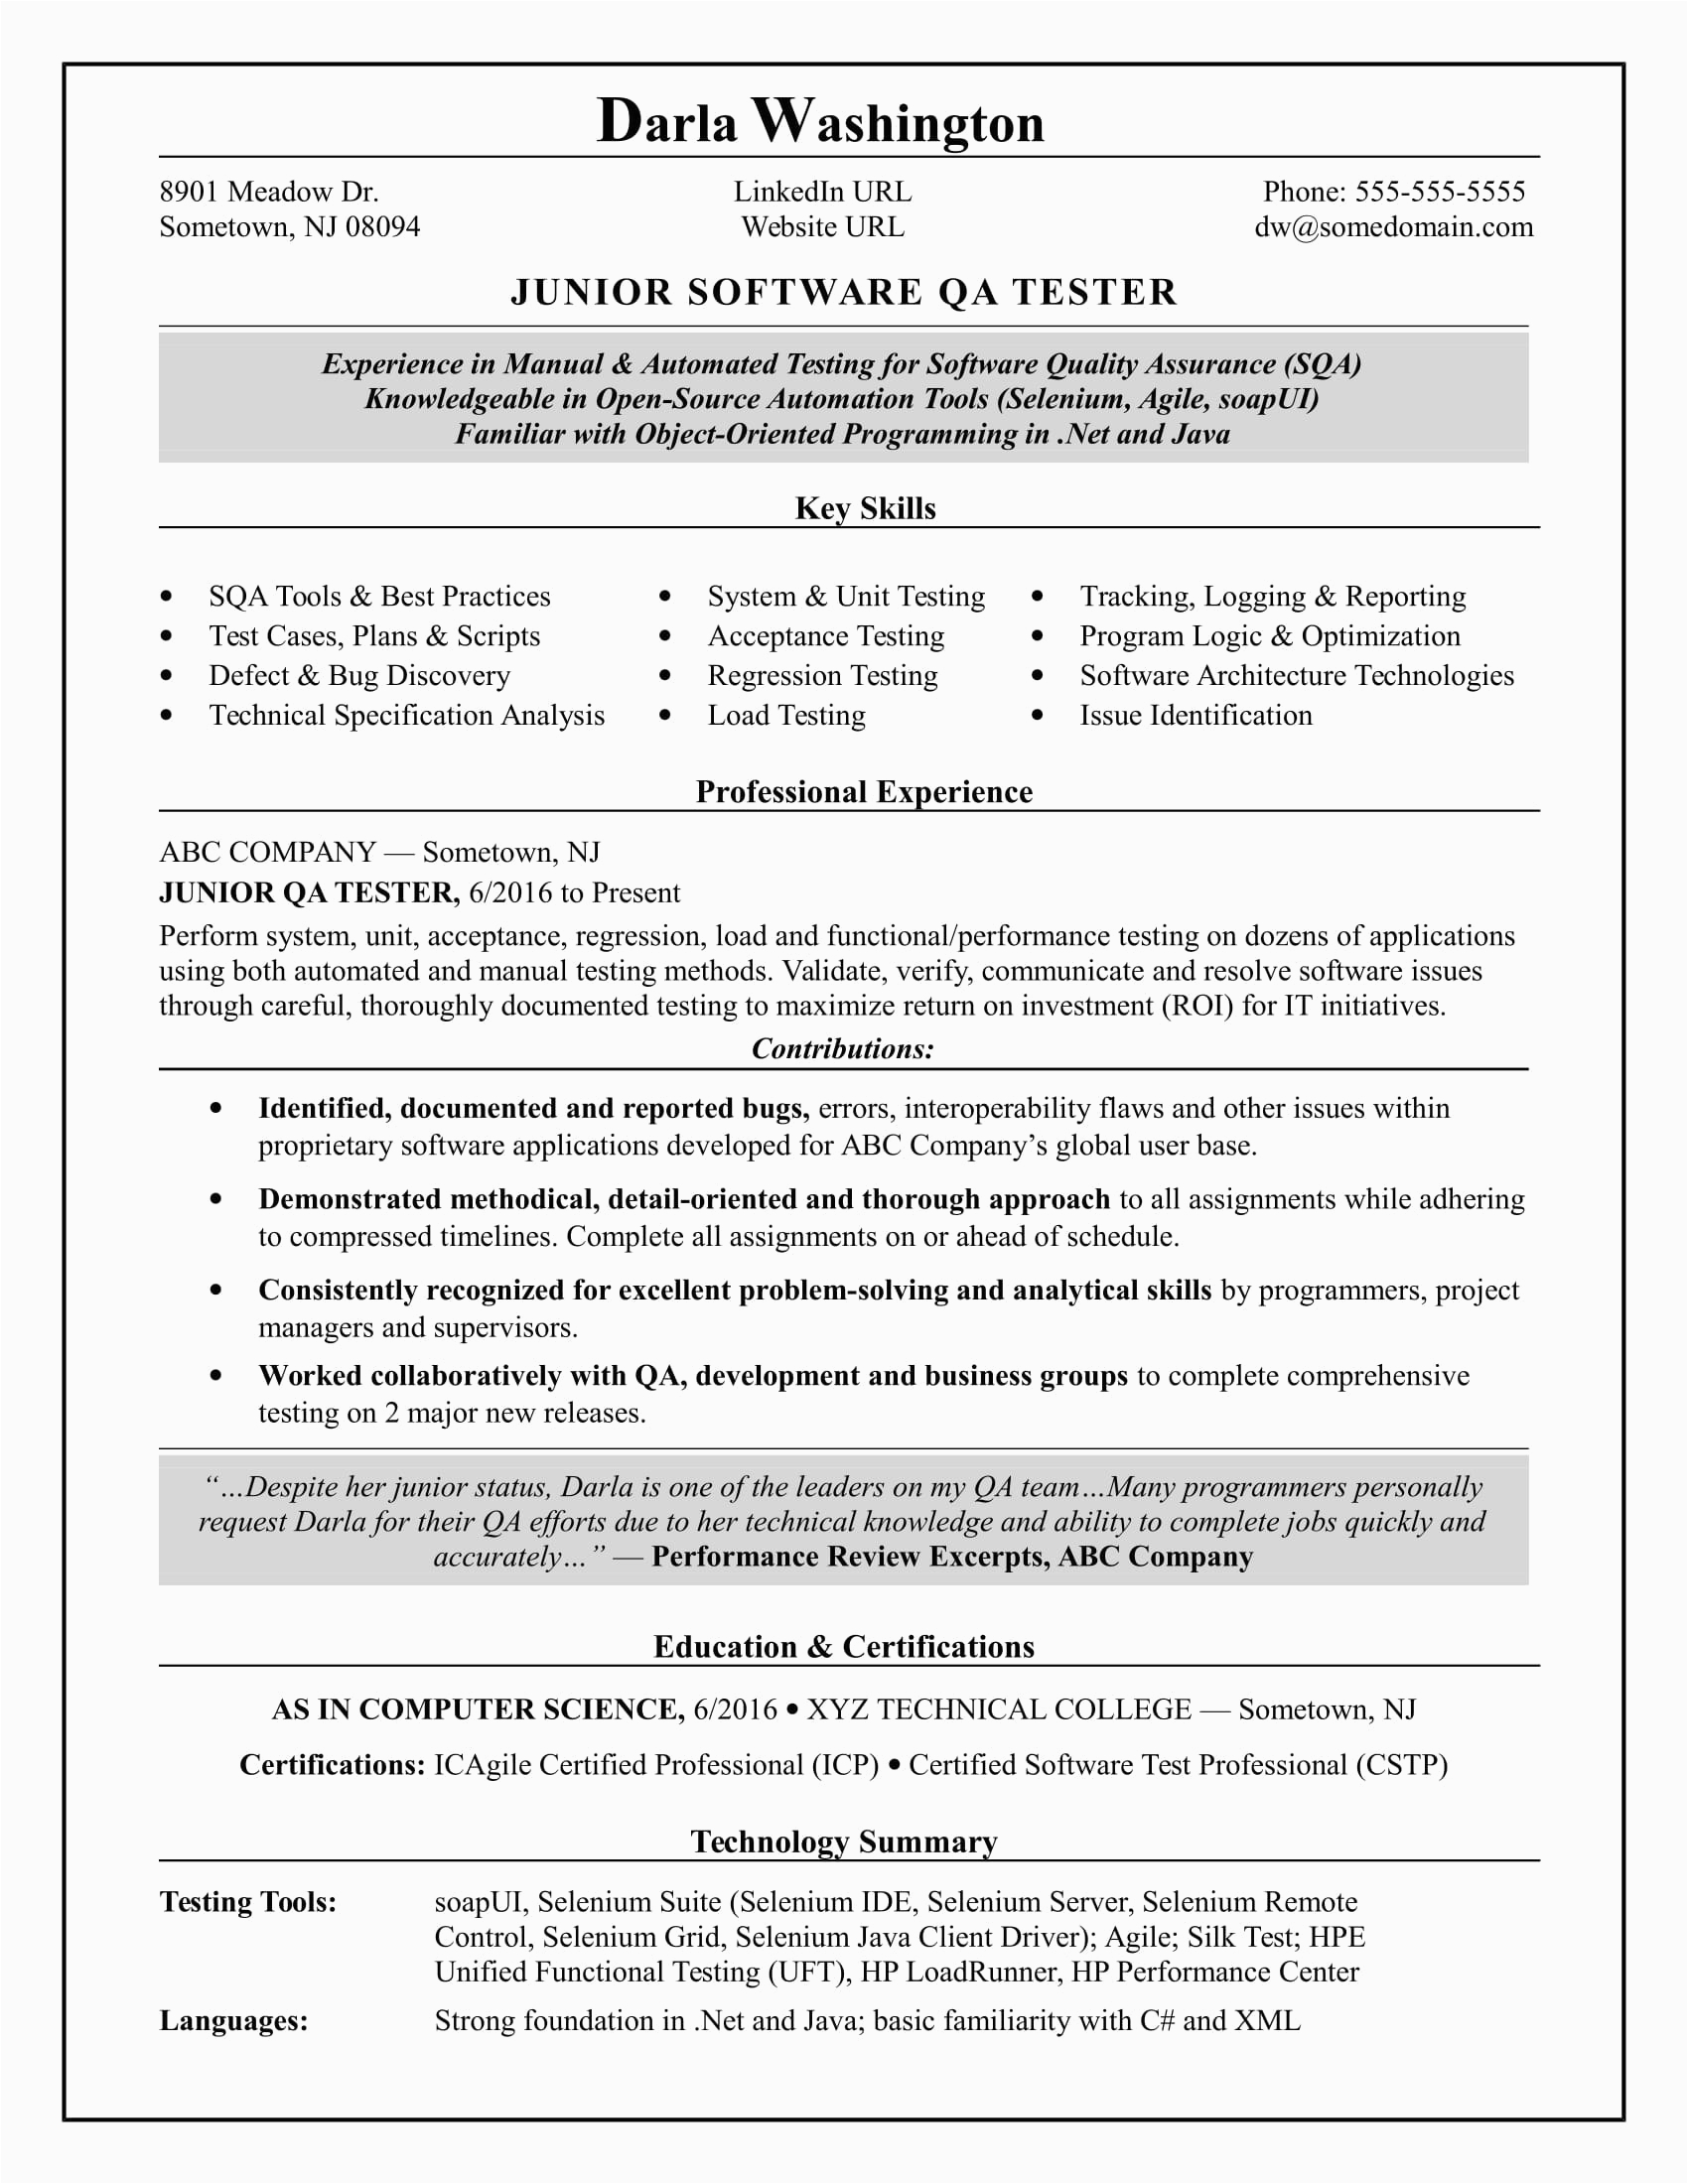 Experienced Resume Samples Of software Tester Entry Level Qa software Tester Resume Sample